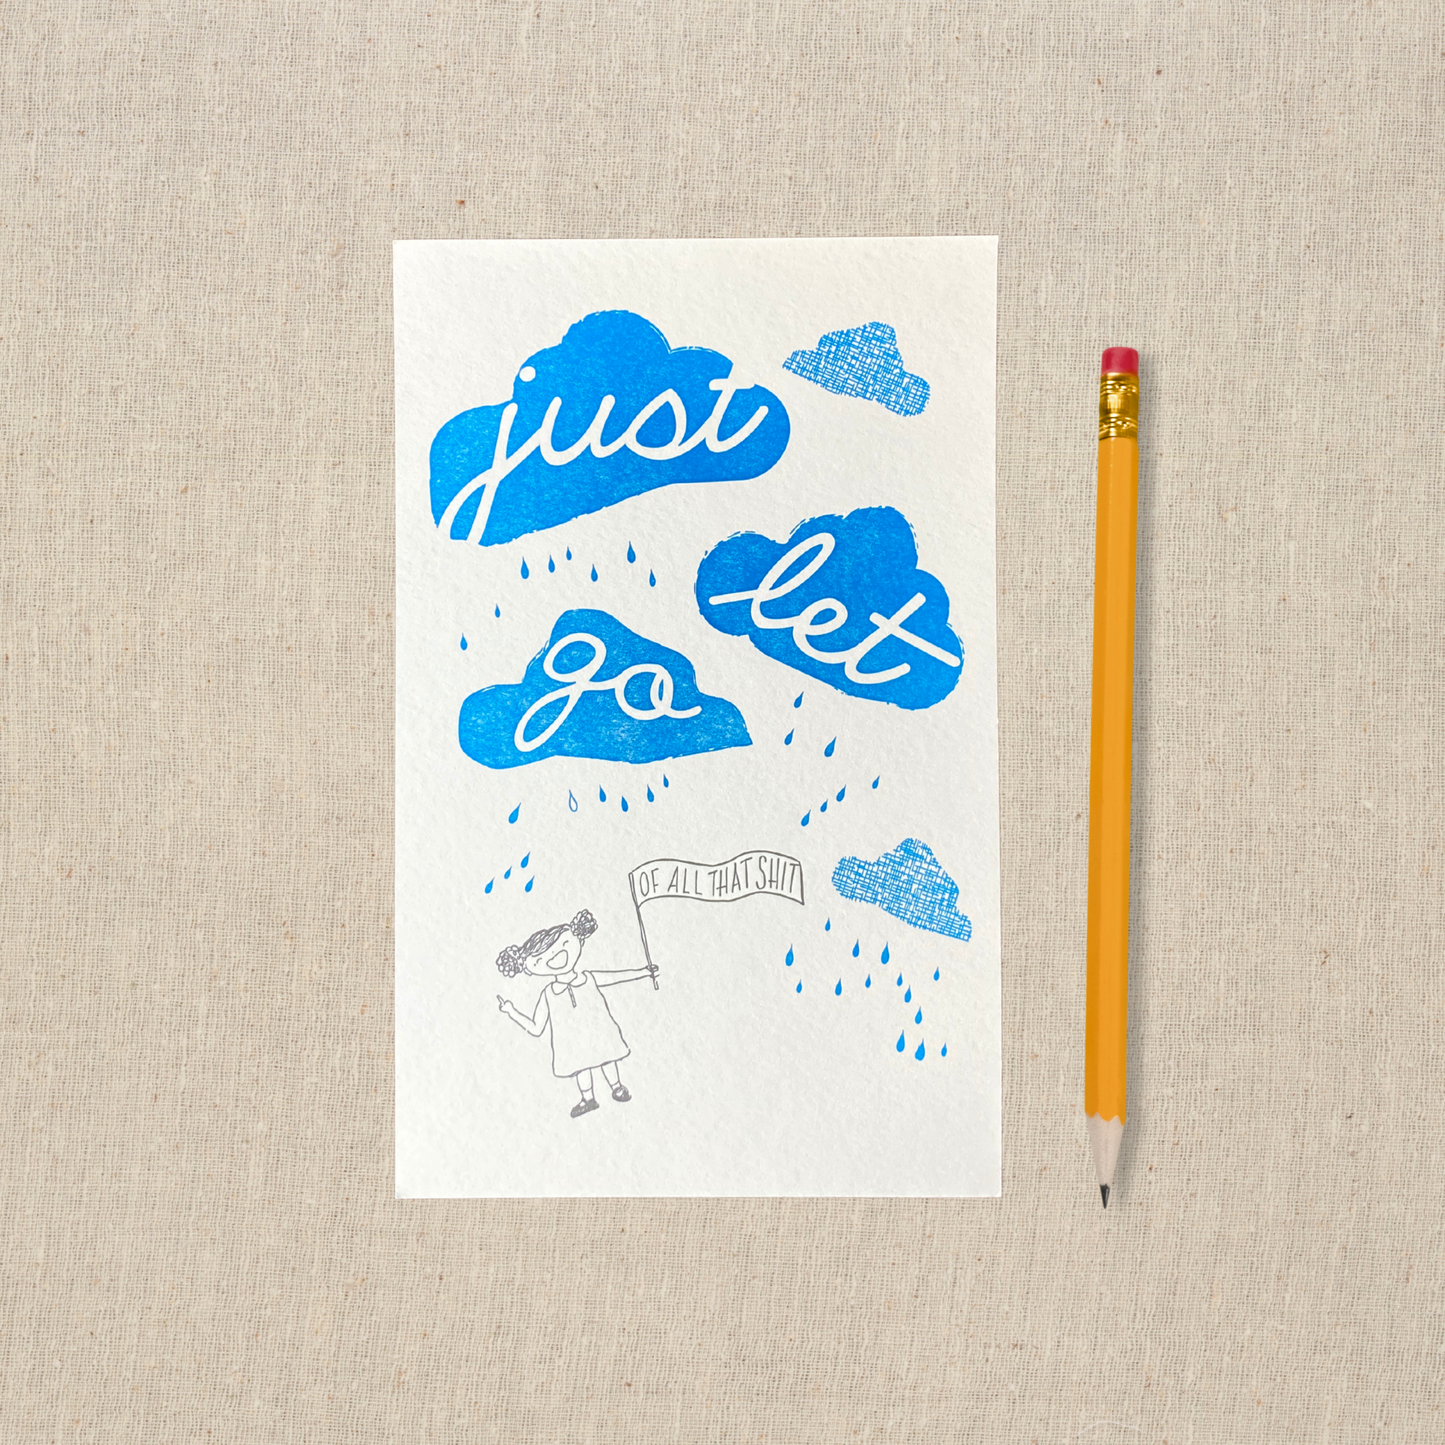 Playful print of small hand drawn figure holding a sign that says of all that shit. Above her are three blue clouds with the words just let go. Letterpress printed. Pencil for scale.